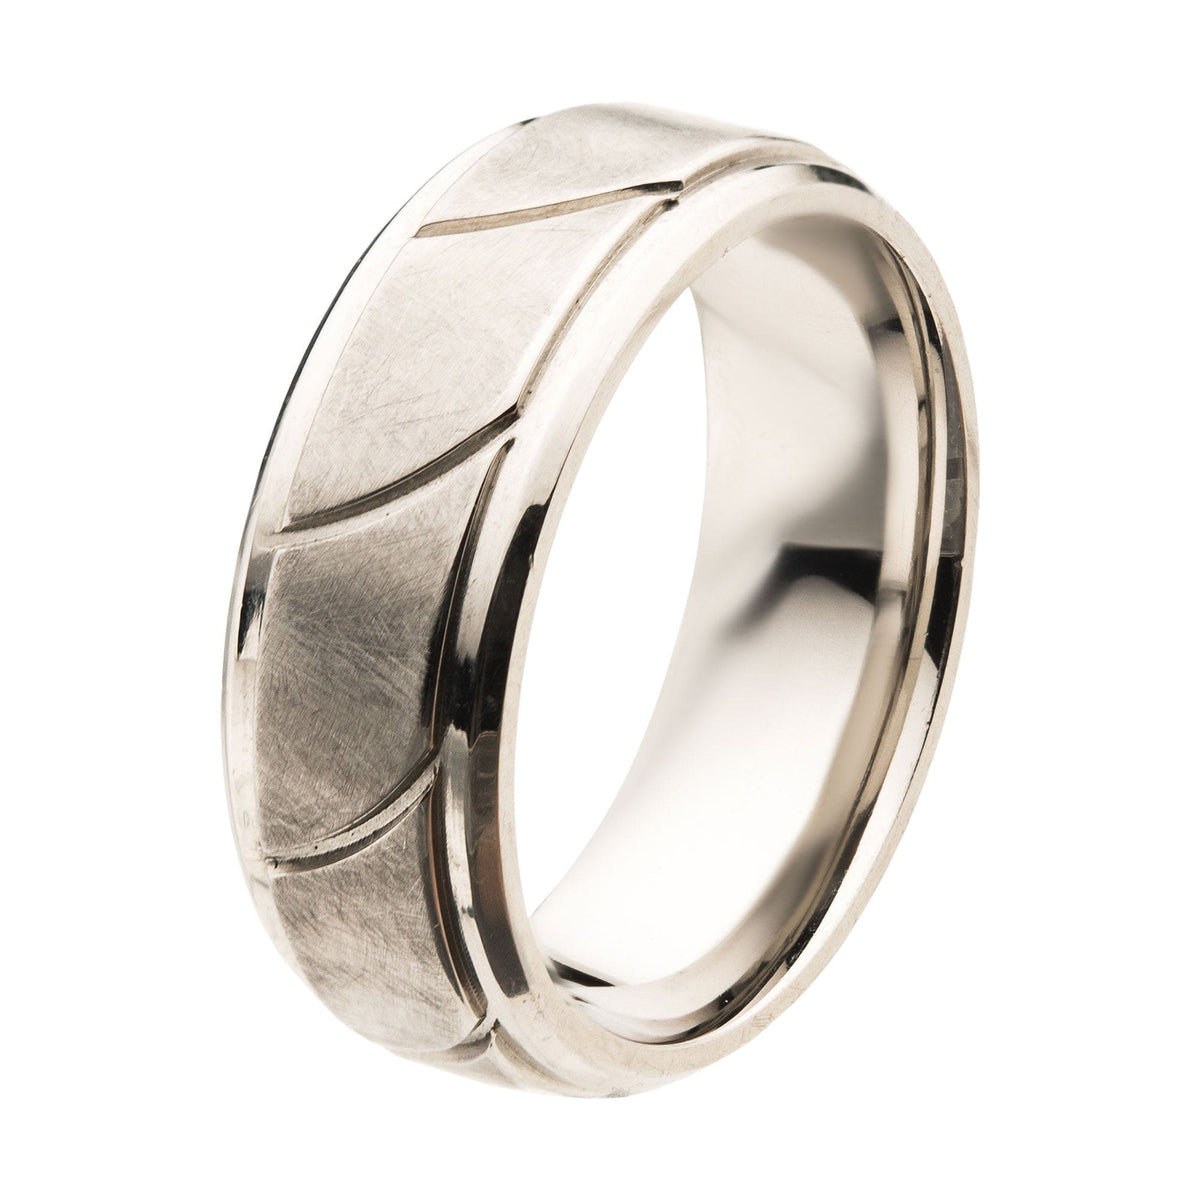 INOX JEWELRY Rings Silver Tone Stainless Steel Brushed with Grooved Beveled Ring